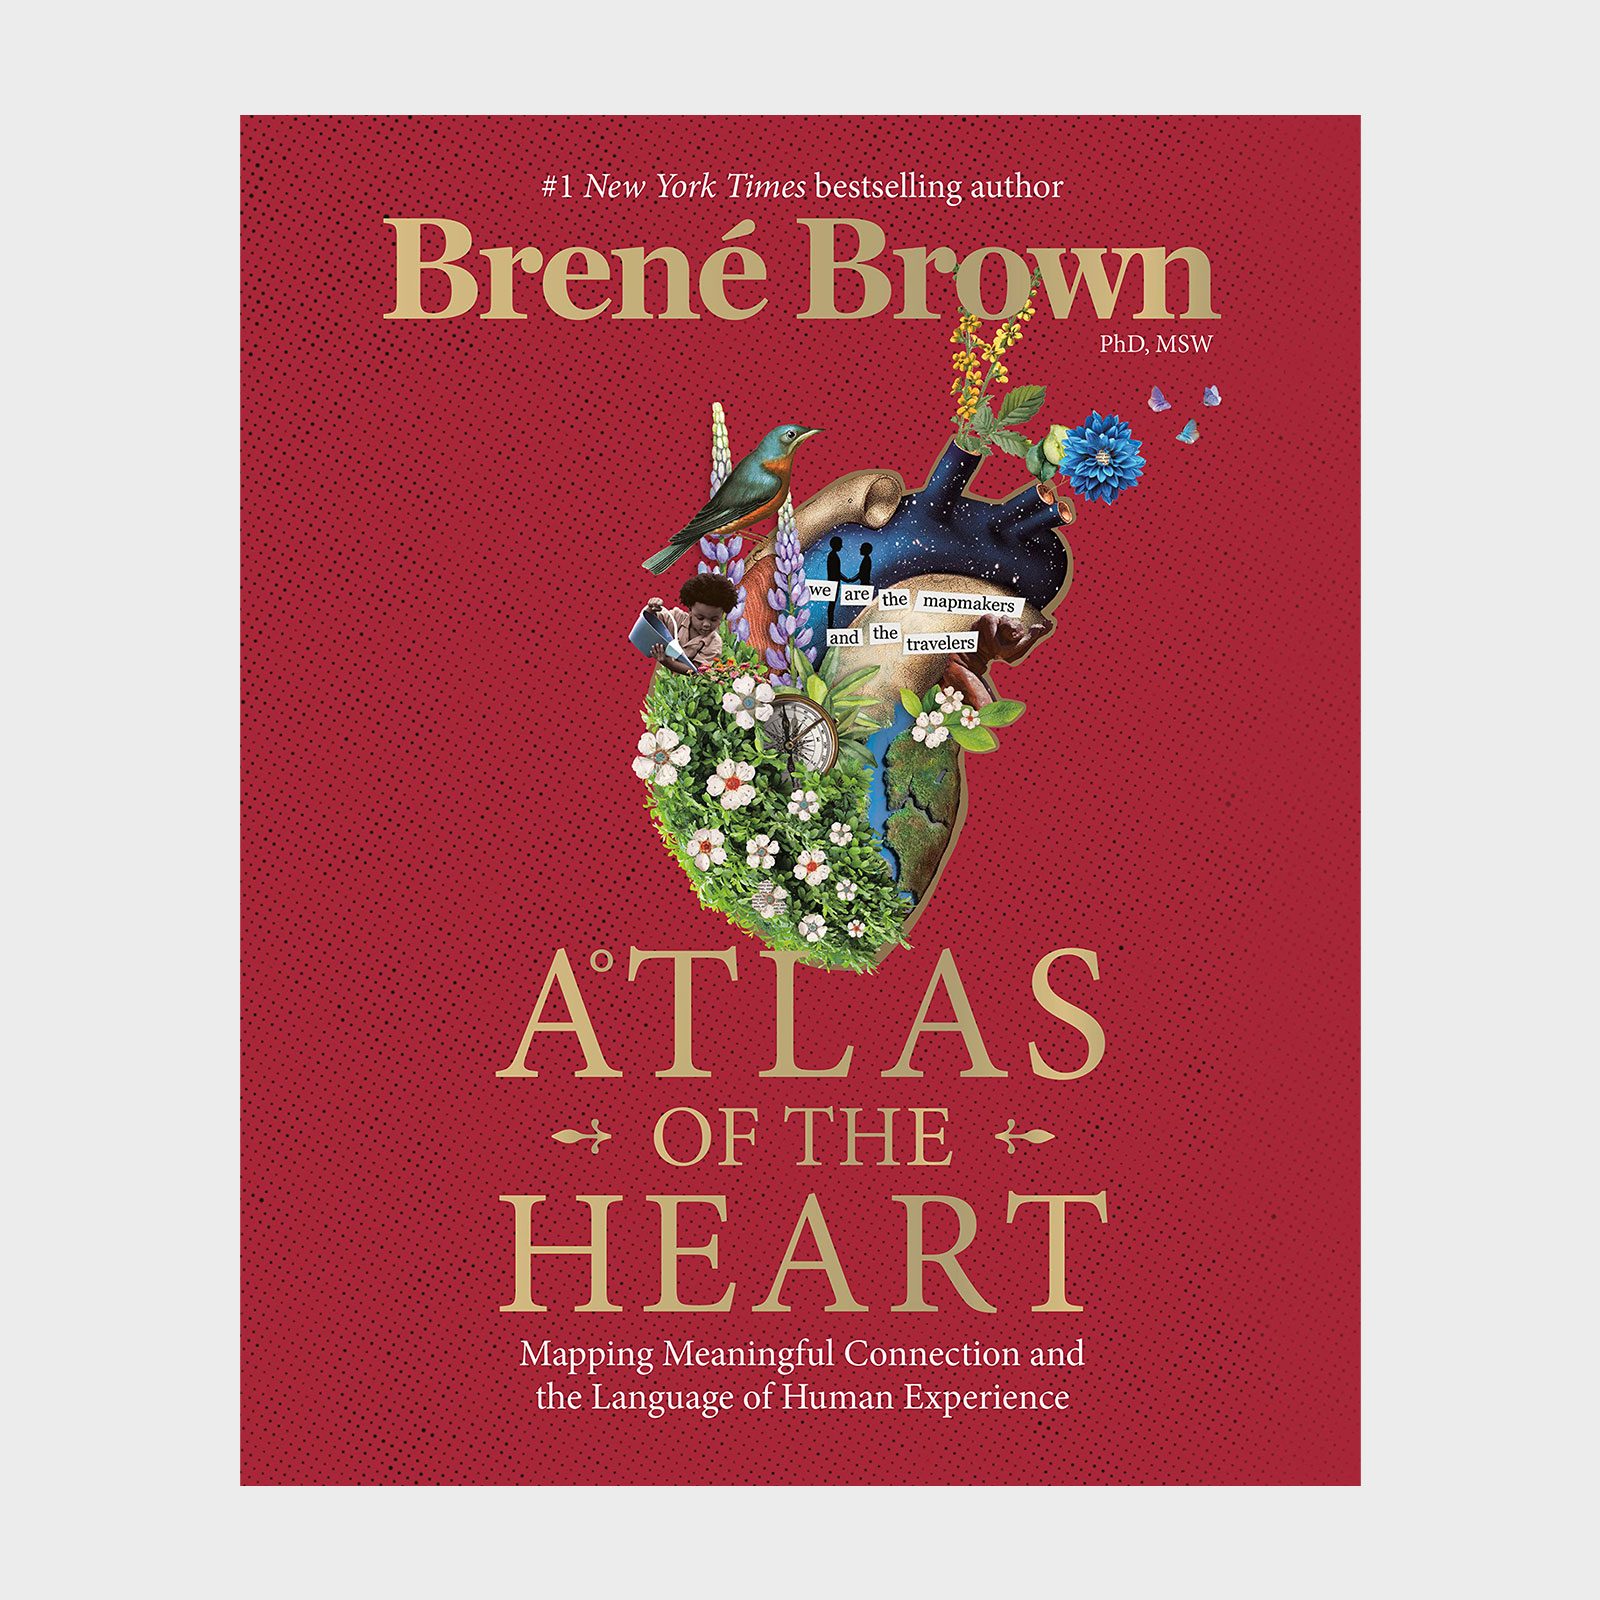 <p>In her 2021 <em>New York Times</em> bestseller <a href="https://www.amazon.com/Atlas-Heart-Meaningful-Connection-Experience/dp/0399592555" rel="noopener"><em>Atlas of the Heart</em></a>, research professor, author and lecturer Brené Brown breaks down 87 essential emotions and experiences that shape us as human beings. She provides readers with the tools and skills needed to make more meaningful connection, to understand what it is to be human and to be inspired by life. For more inspirational books on mindfulness, reflection or <a href="https://www.rd.com/article/how-to-set-boundaries/">how to set boundaries</a>, look to Brown's decade-spanning body of work.</p> <p class="listicle-page__cta-button-shop"><a class="shop-btn" href="https://www.amazon.com/Atlas-Heart-Meaningful-Connection-Experience/dp/0399592555/">Shop Now</a></p>